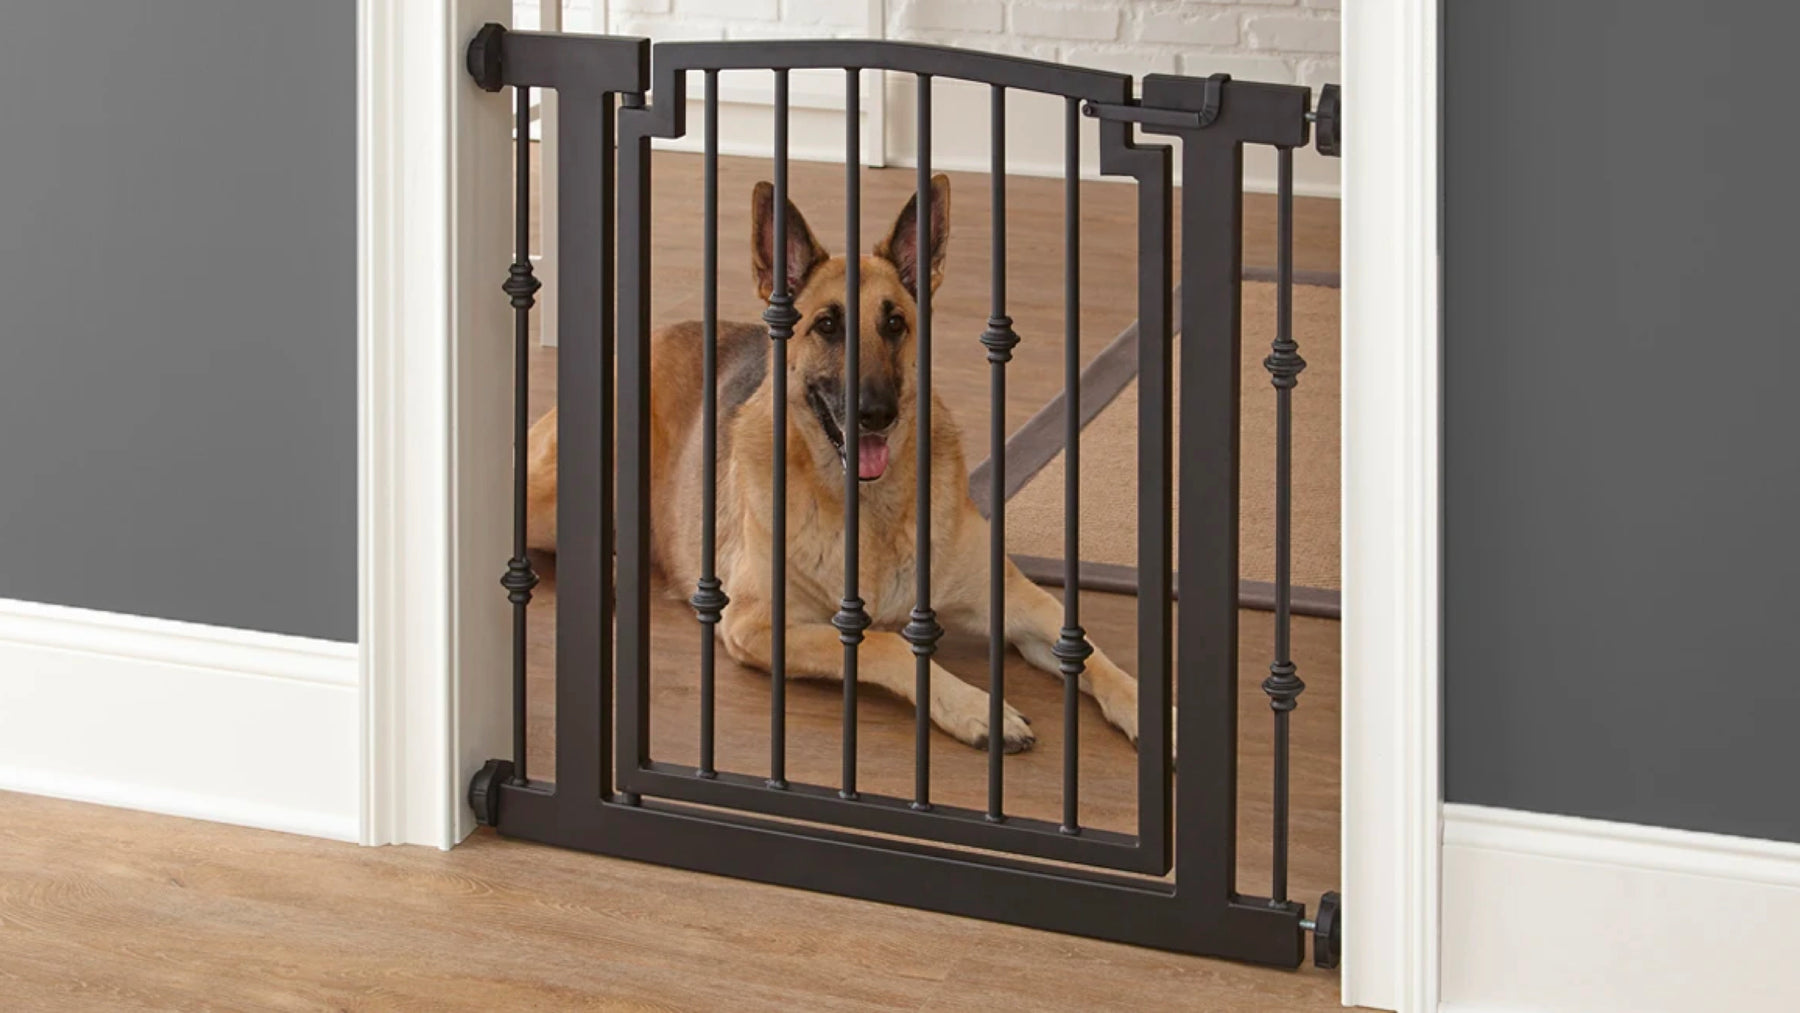 Emperor Rings Pet Gate. Stylish Strong Indoor Dog Gate with Door. For Doorway, Stairs, Extra Wide, Pressure Mounted for Inside the House. Mocha (Brown) shown with German Shepherd. Heavy Duty Dog Gate for Strong Large Dogs. Elegant, Designer, Luxury. Emepror Rings by NMN Designs